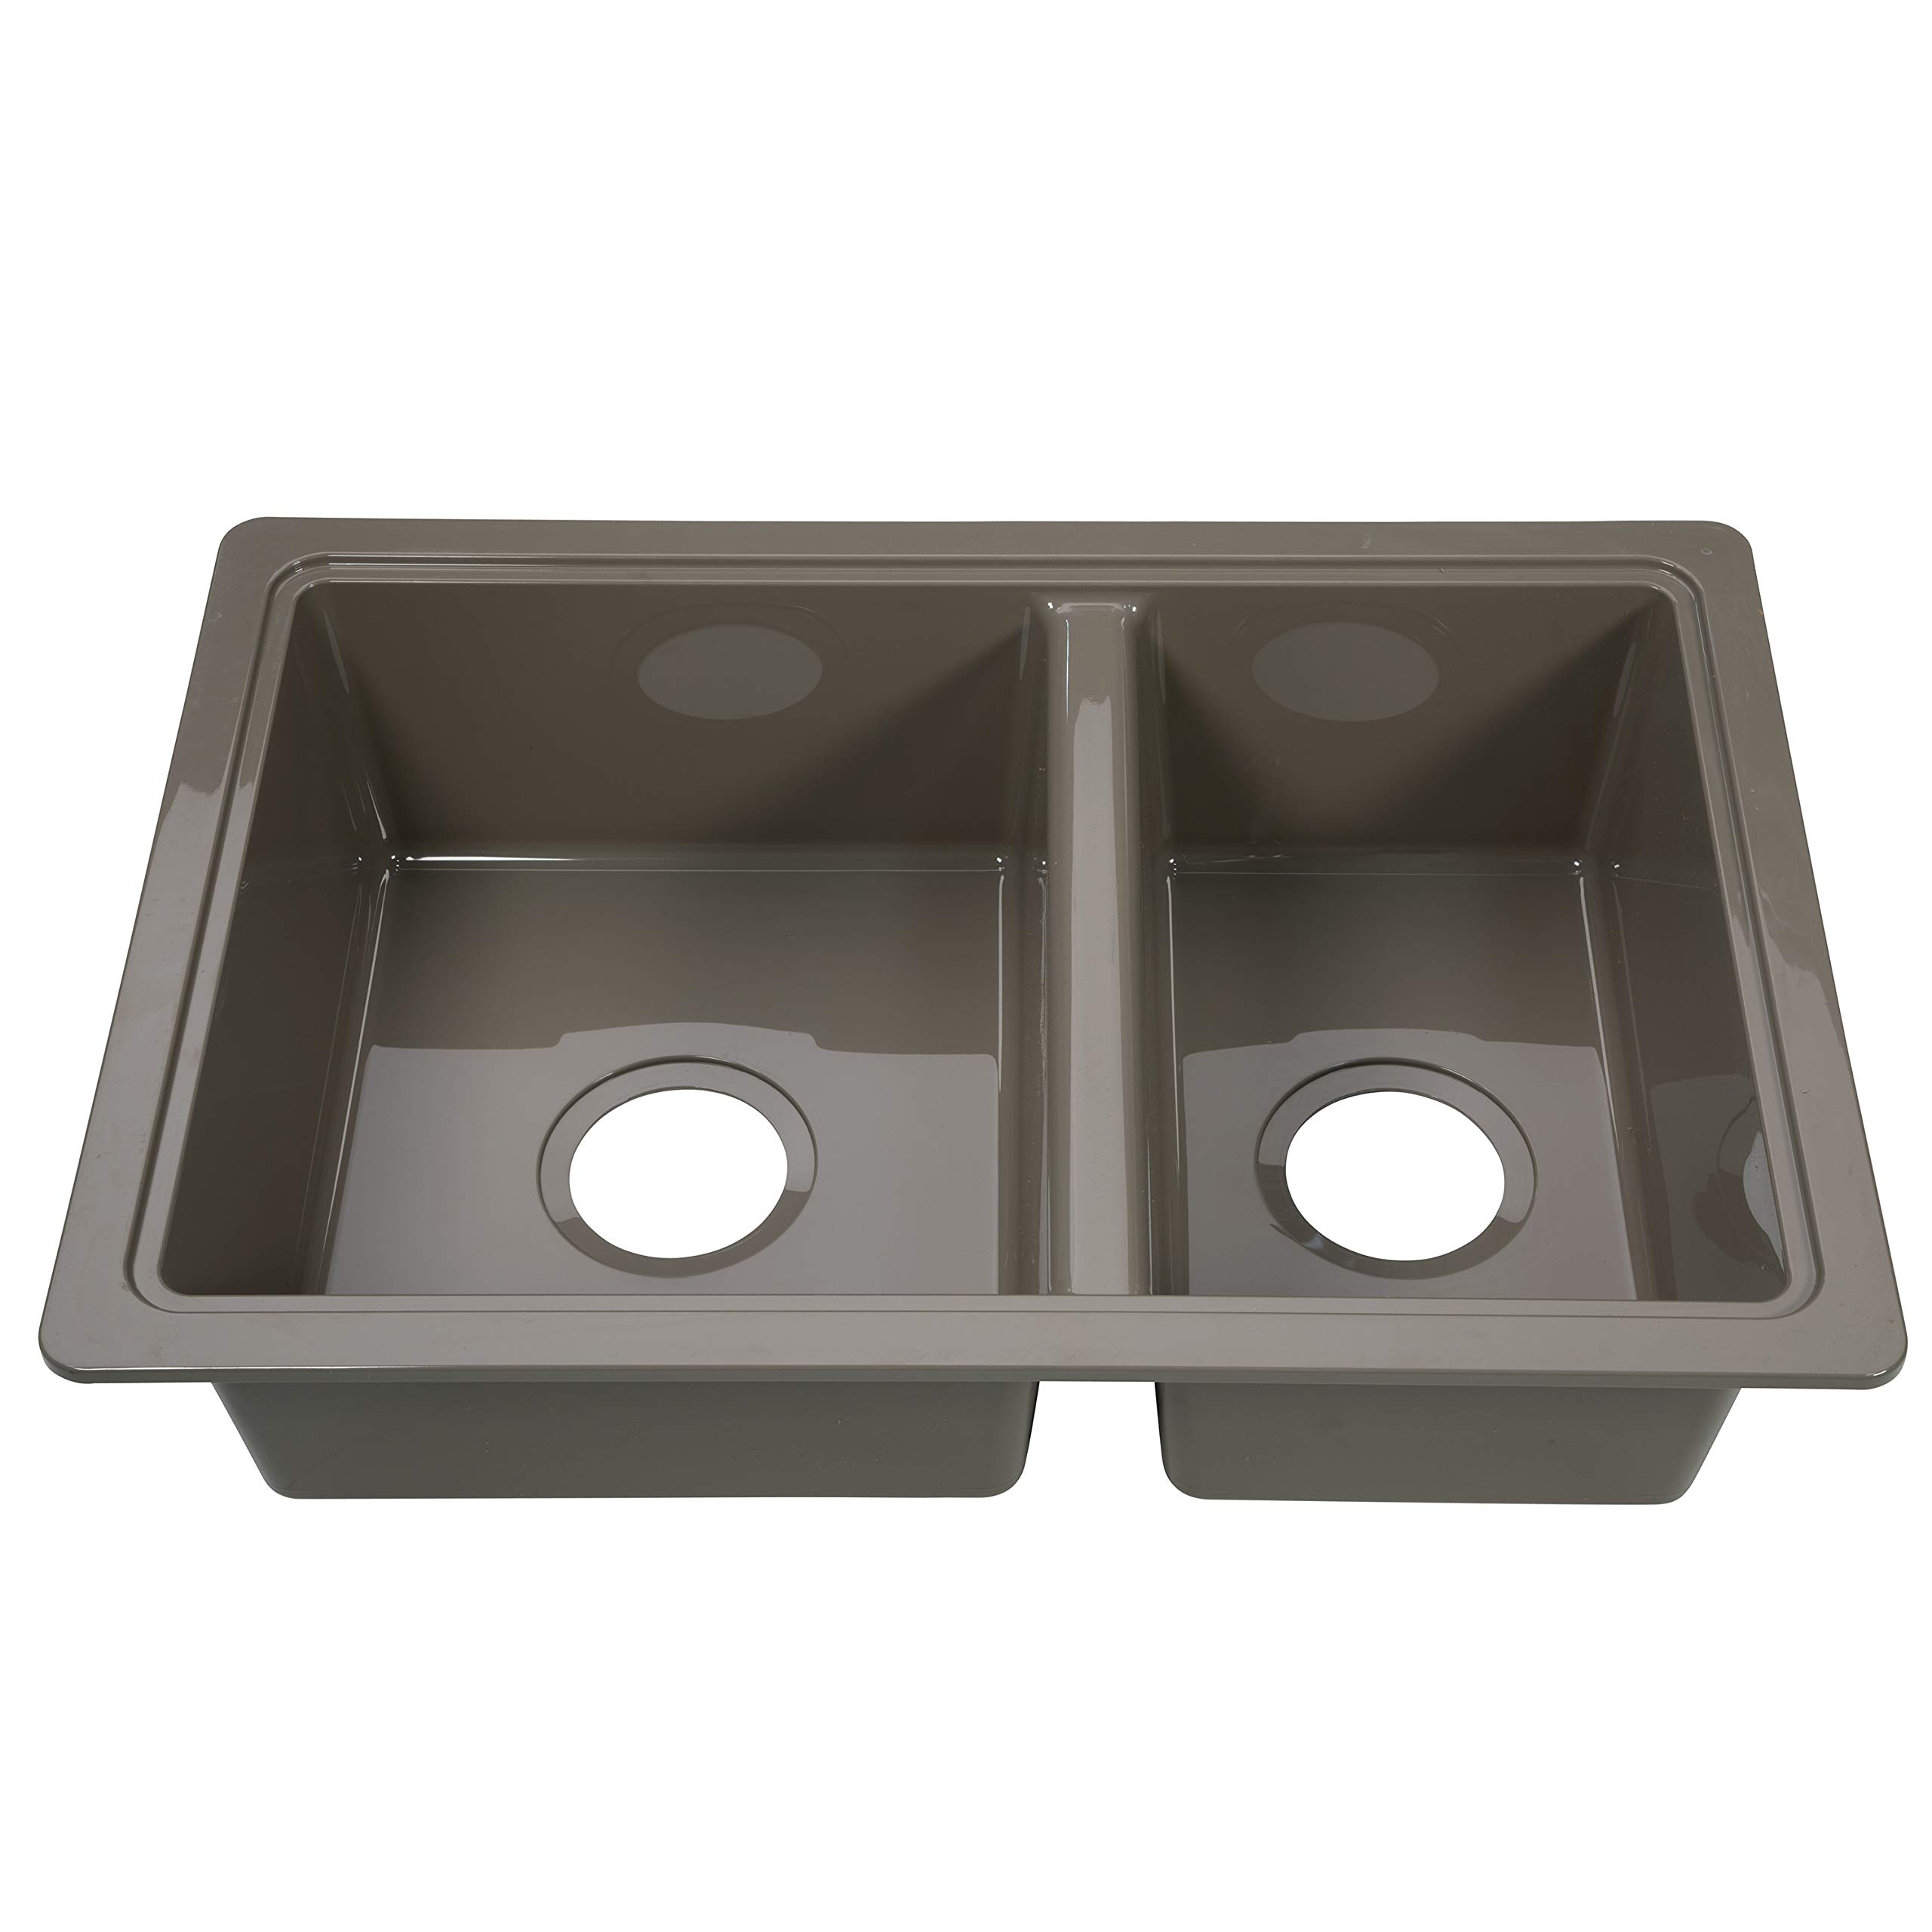 25IN X 17IN DOUBLE BOWL SINK  STAINLESS STEEL COLOR